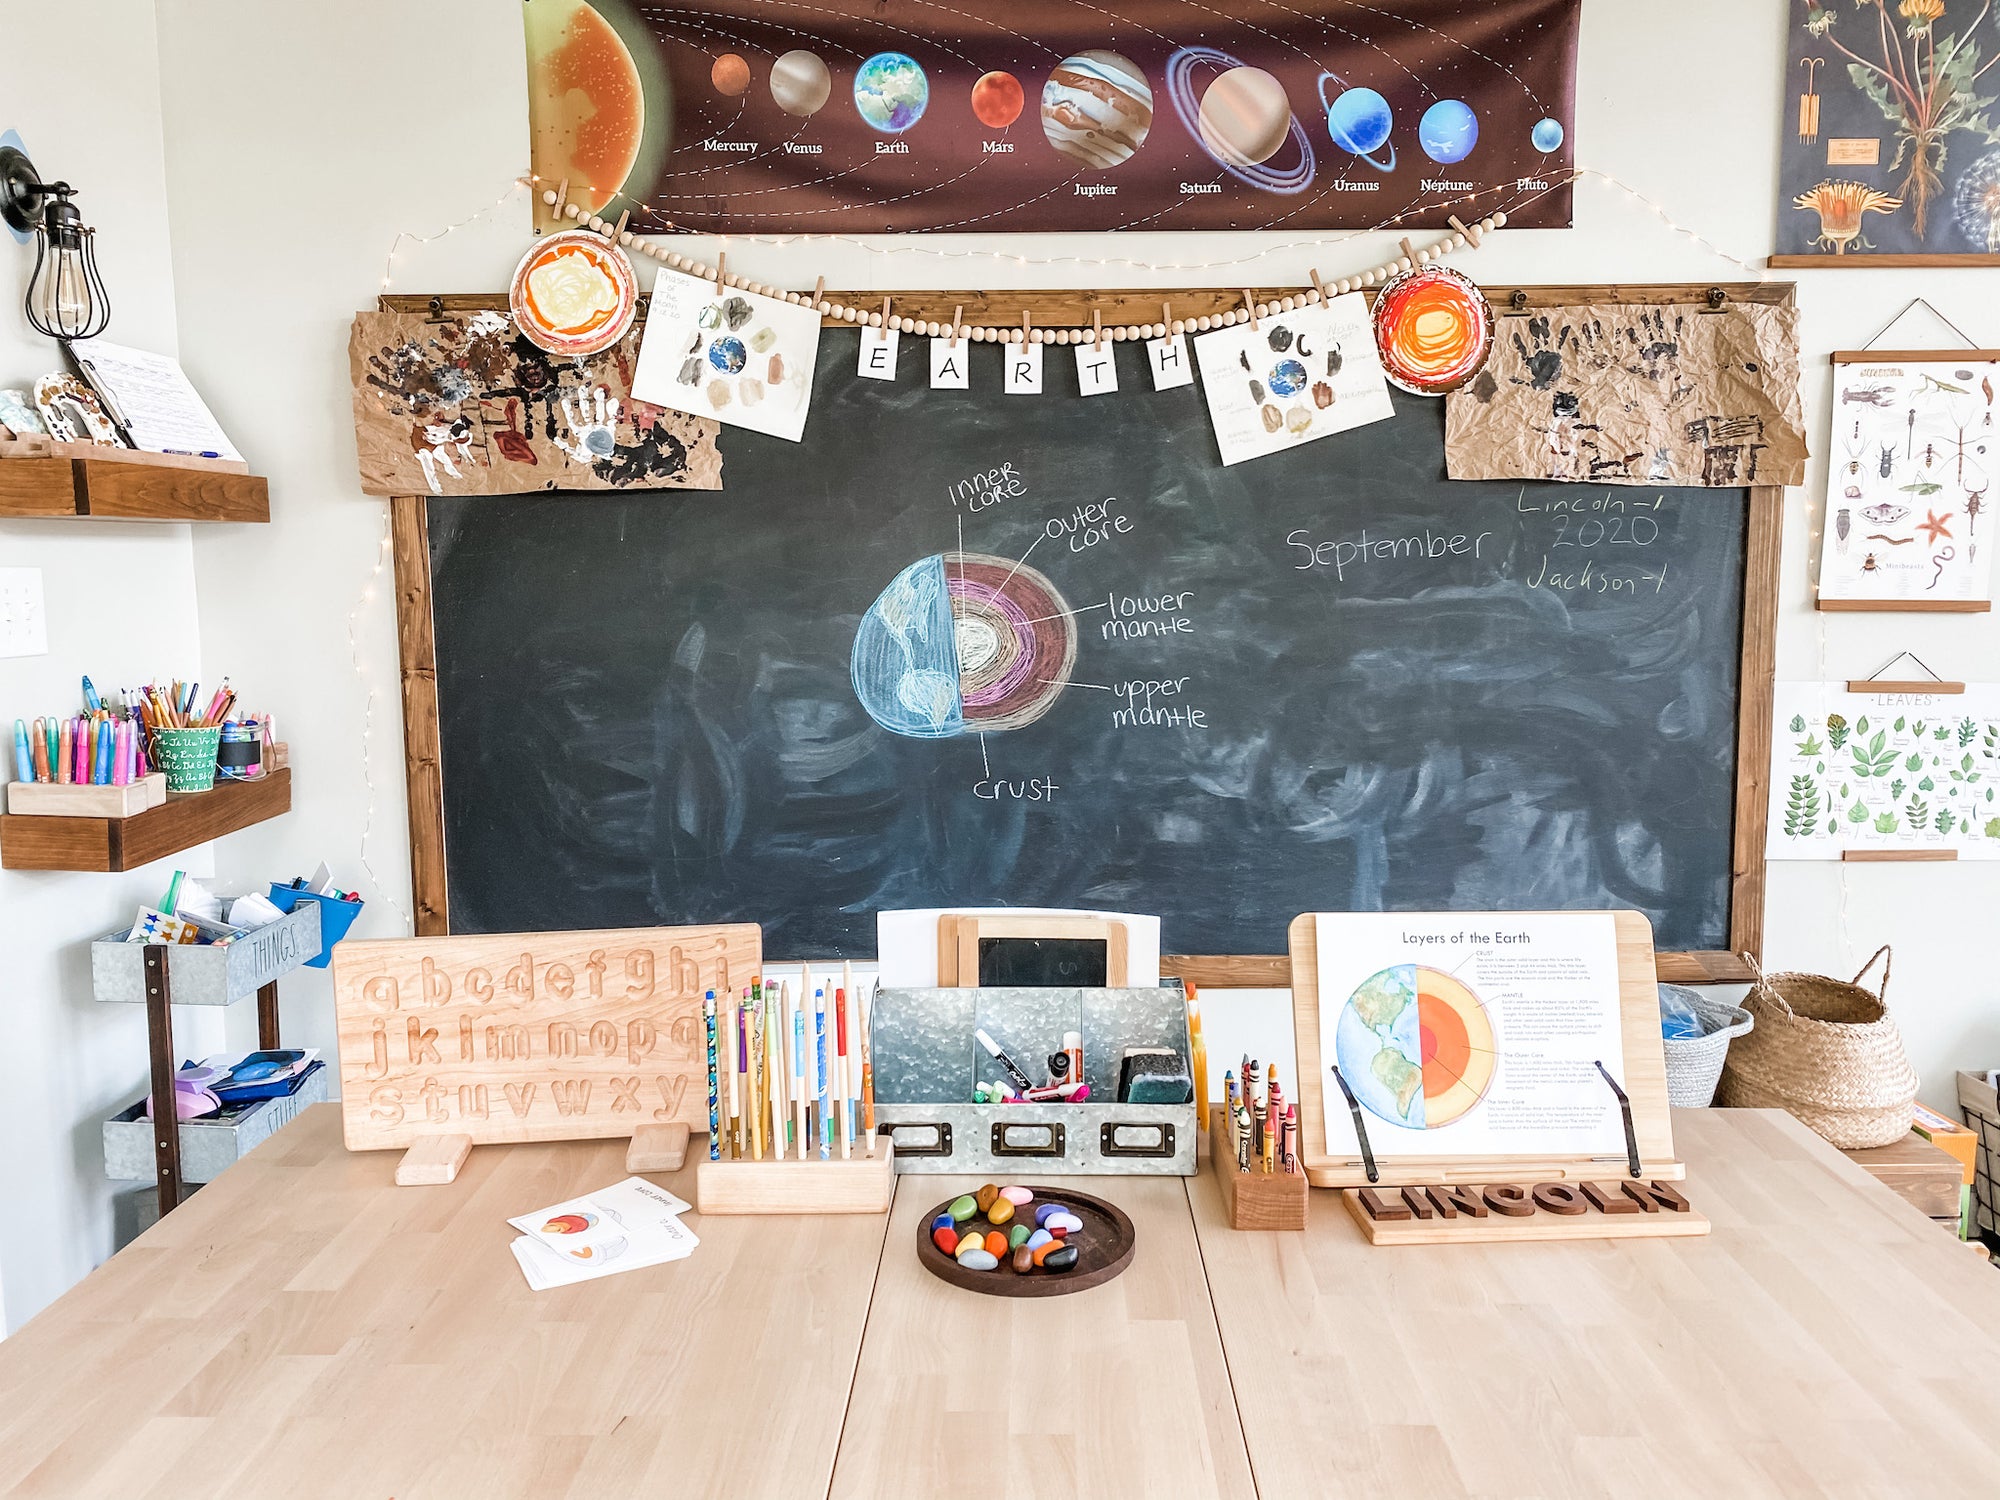 Homeschool classroom picture and organization ideas.